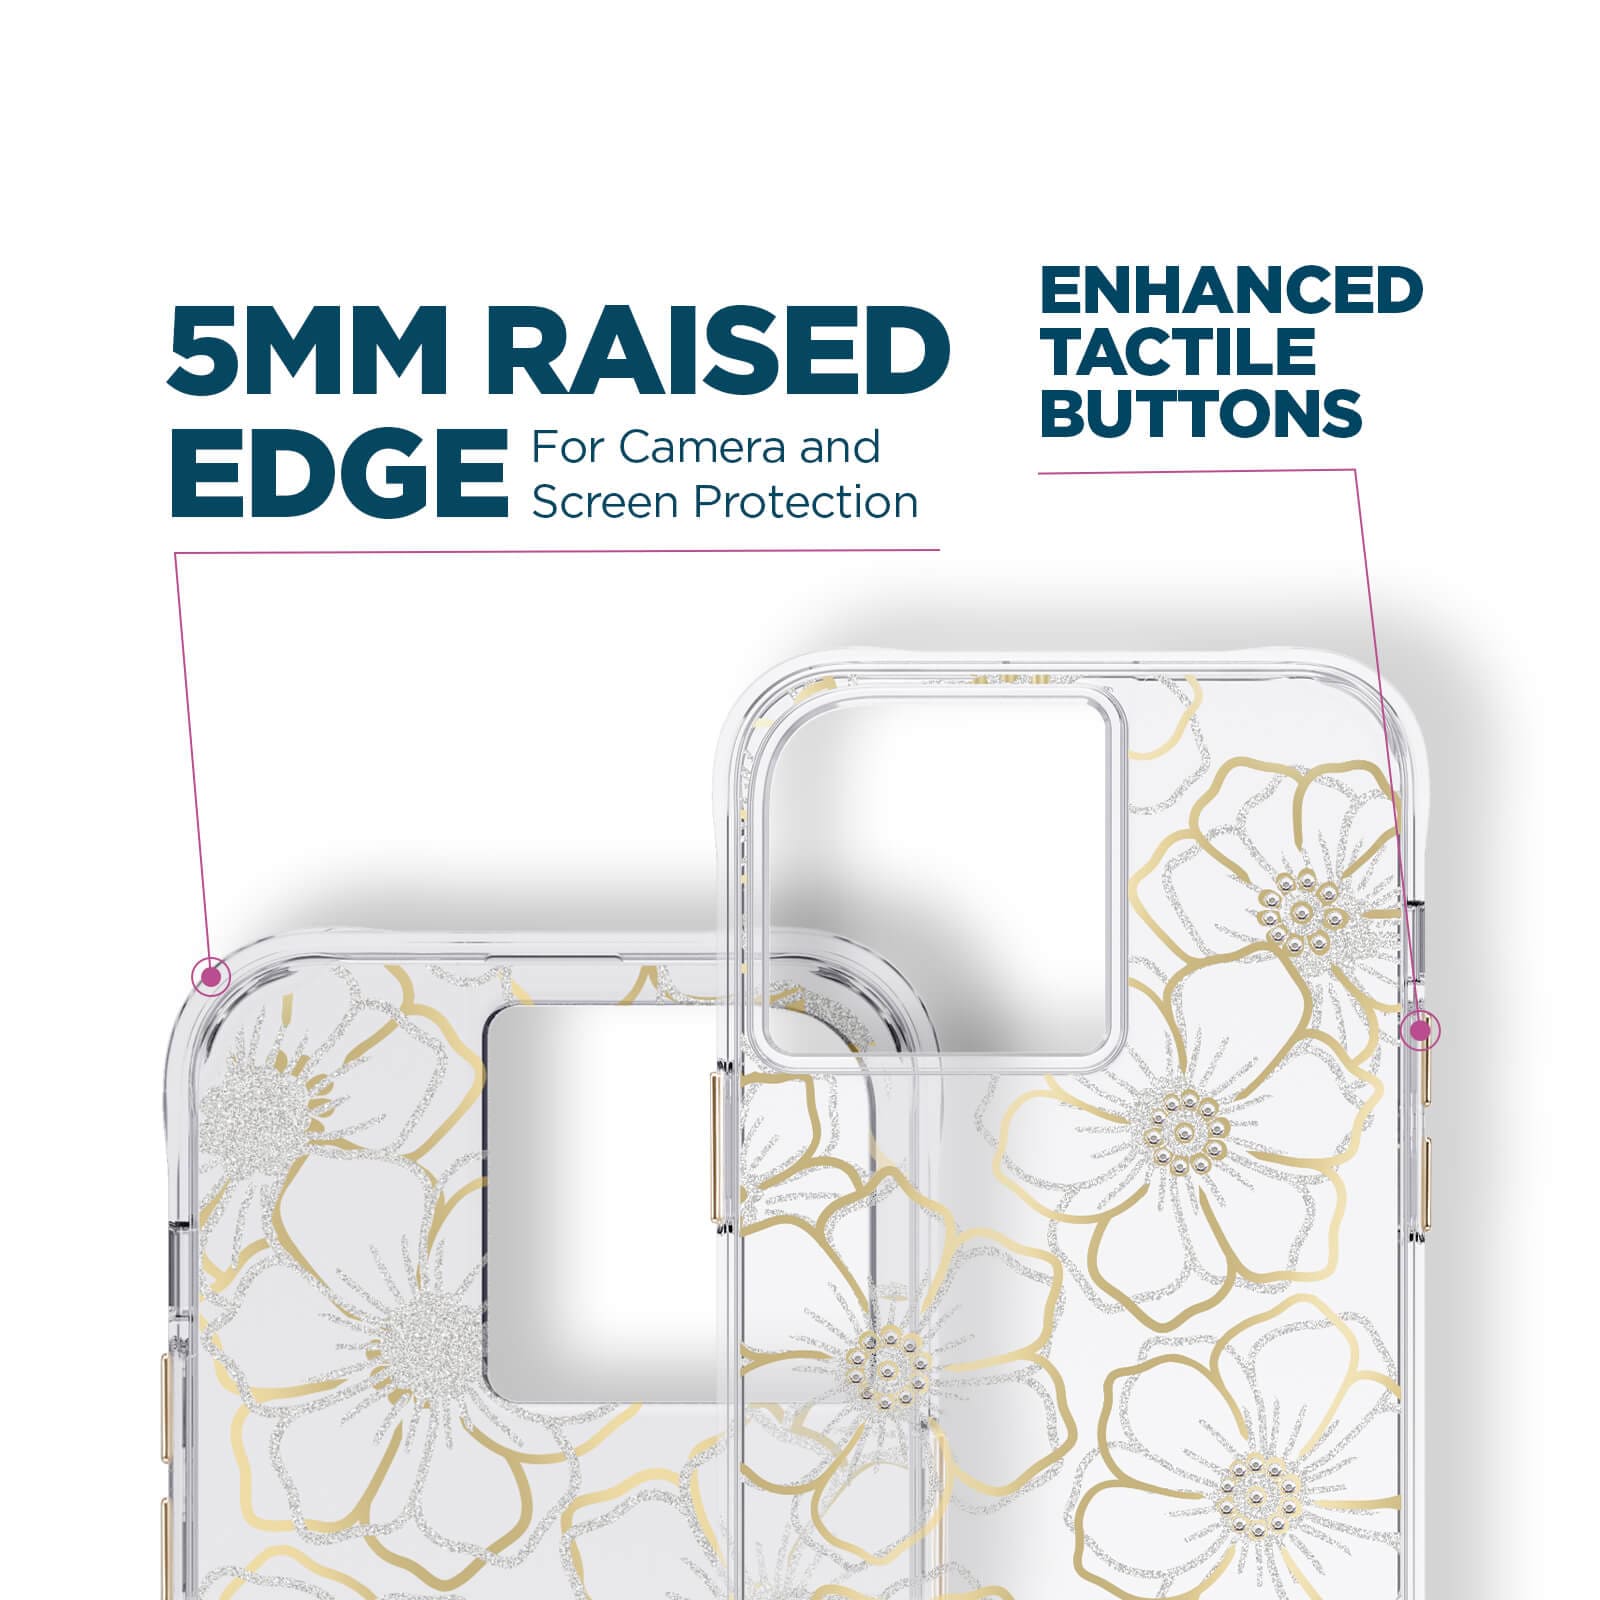 5mm raised edge for camera and screen protection. Enhanced tactile buttons. color::Floral Gems